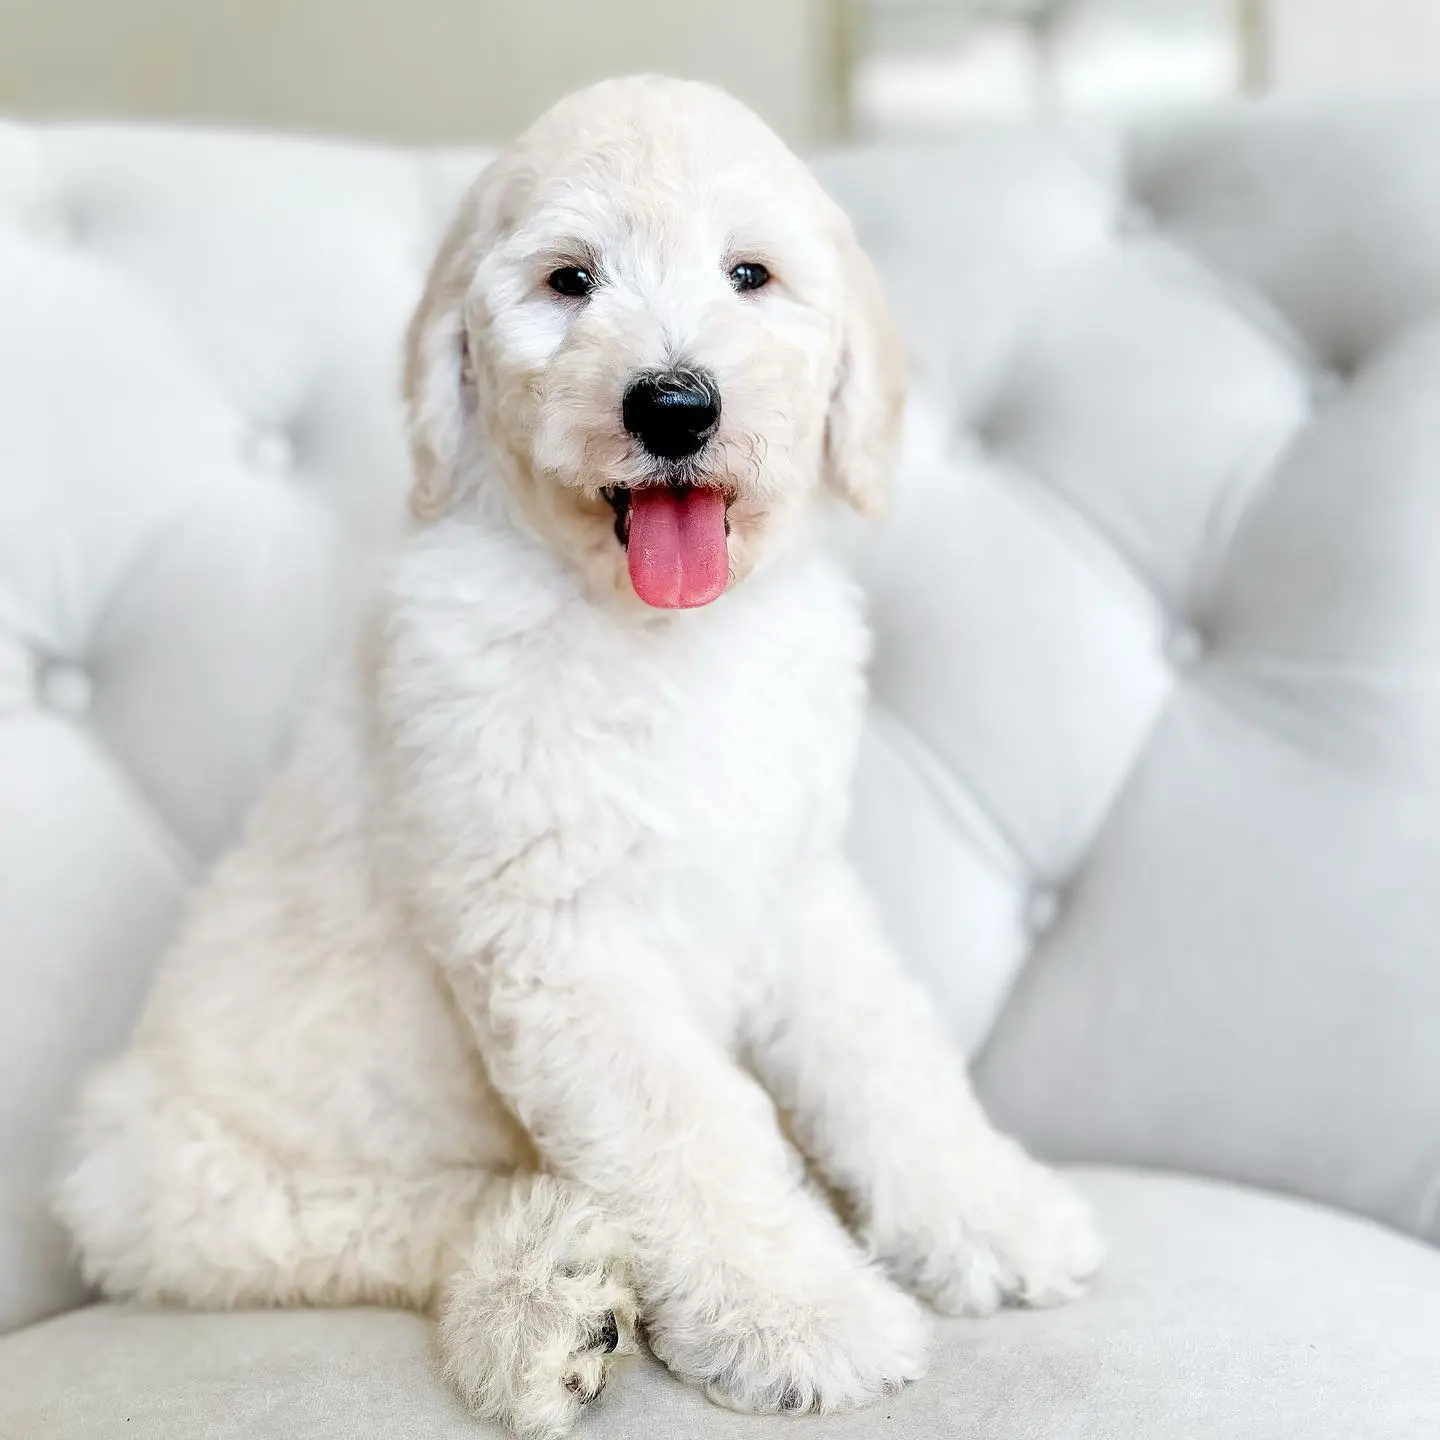 miniature white English teddy bear golden doodle puppy on a couch